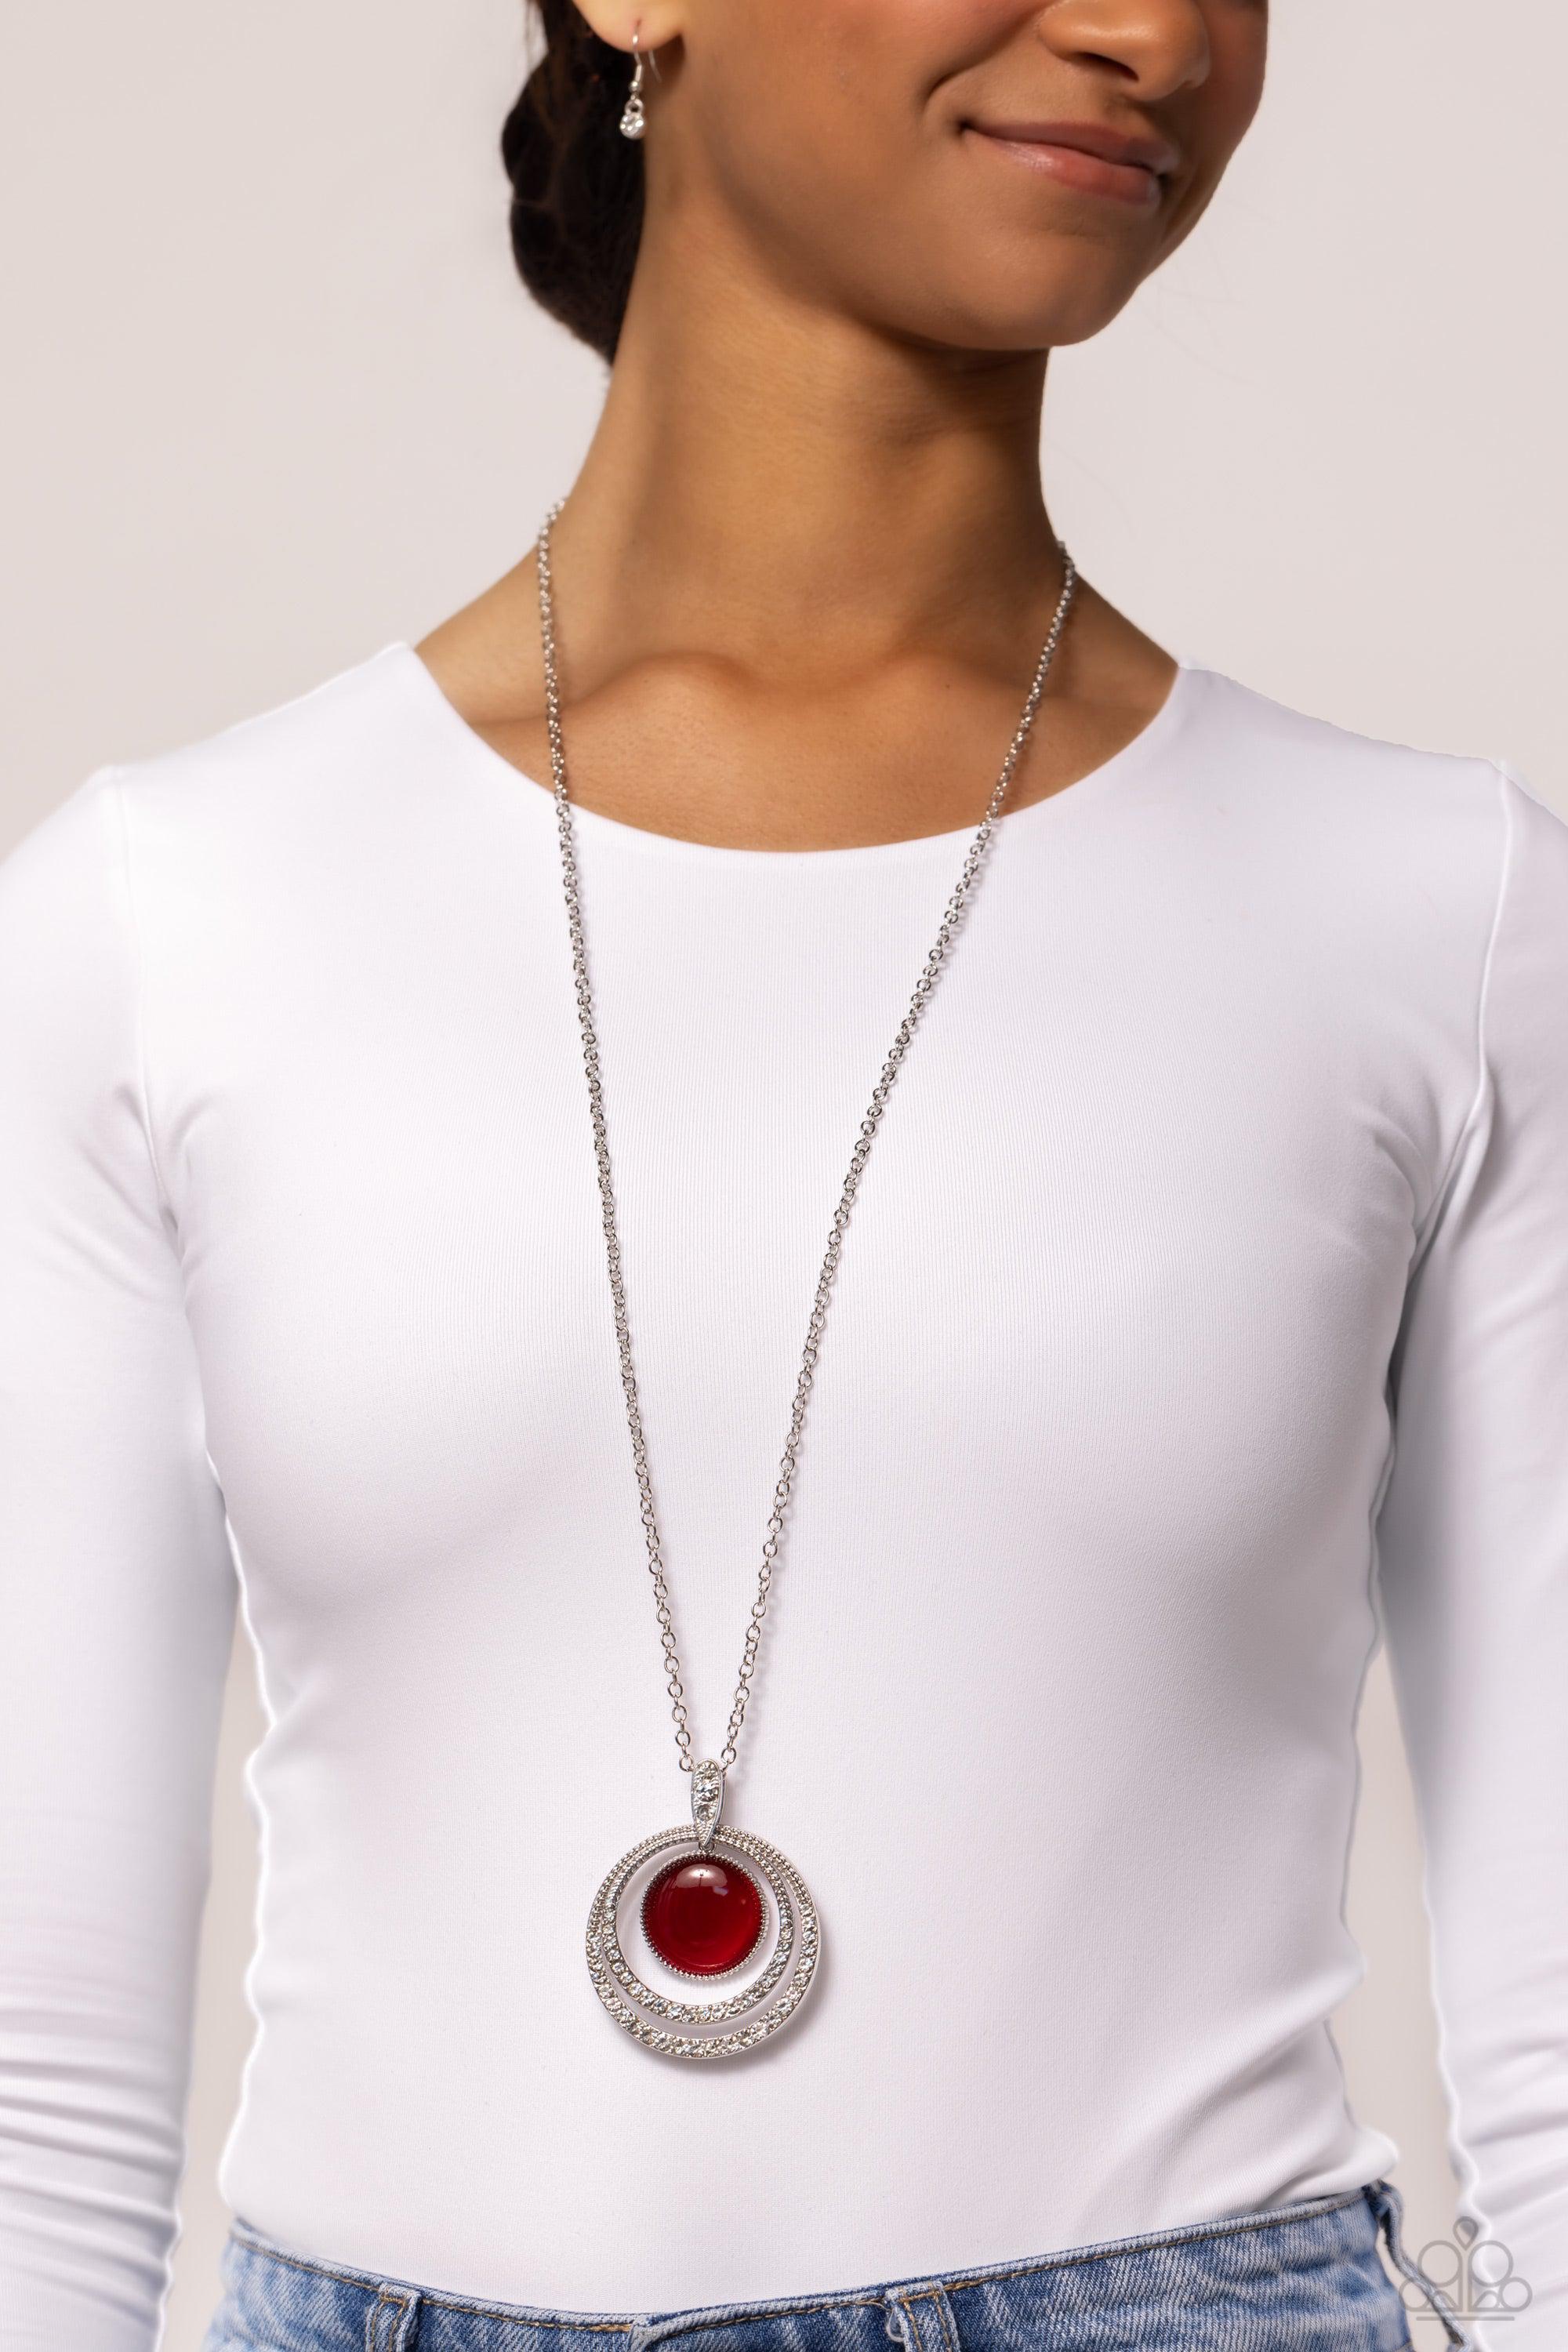 Cats Eye Couture Red Necklace - Paparazzi Accessories- lightbox - CarasShop.com - $5 Jewelry by Cara Jewels